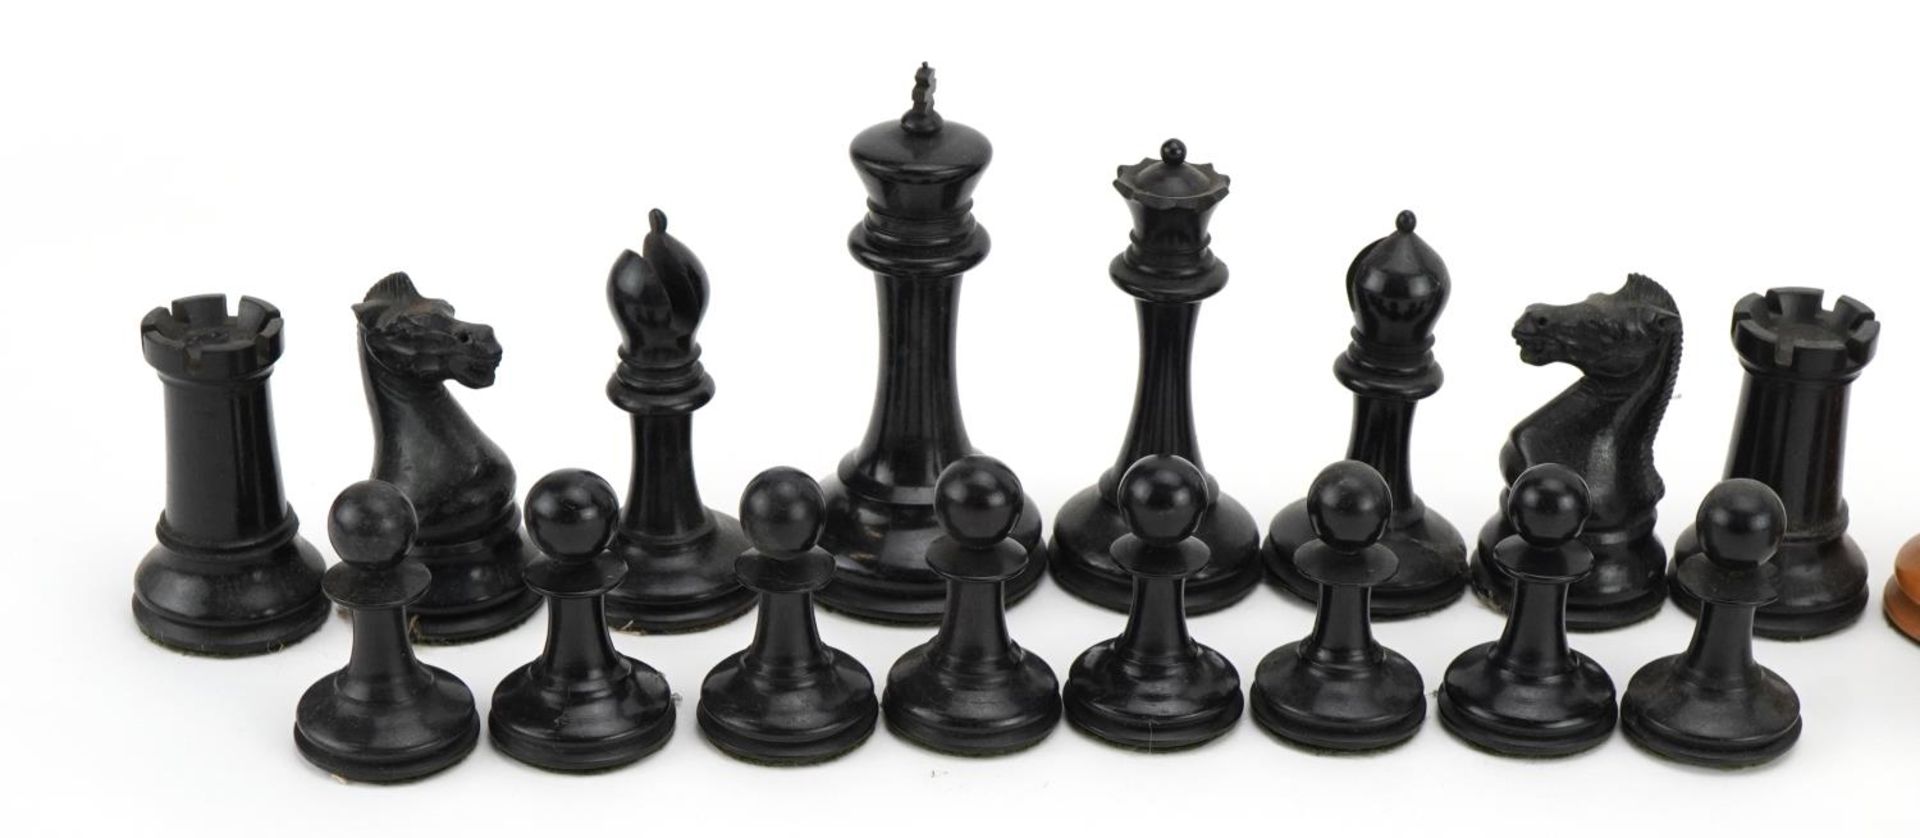 Jaques of London, boxwood and ebony Staunton pattern chess set, the largest pieces each 9cm high - Image 2 of 7